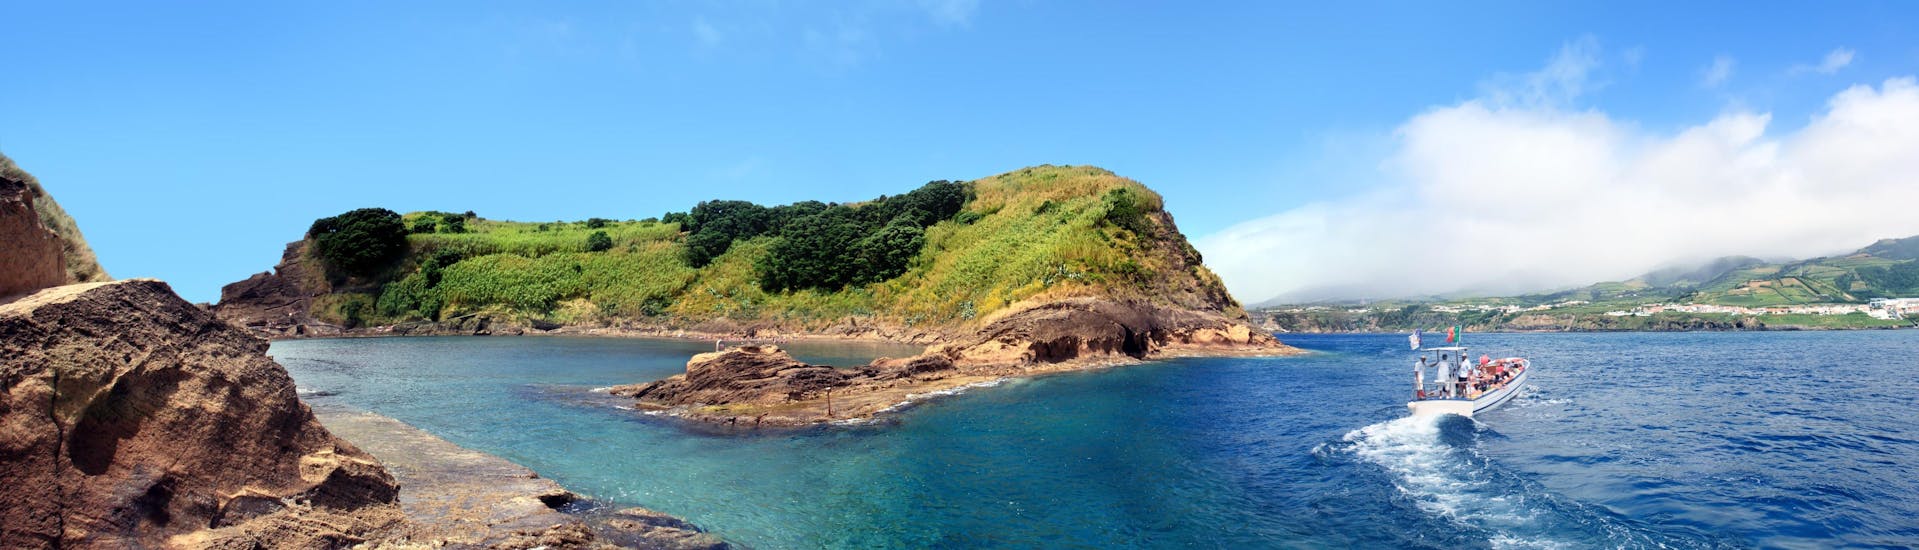 View of the islet of Vila Franca do Campo, a popular destination for boat trips in Azores.